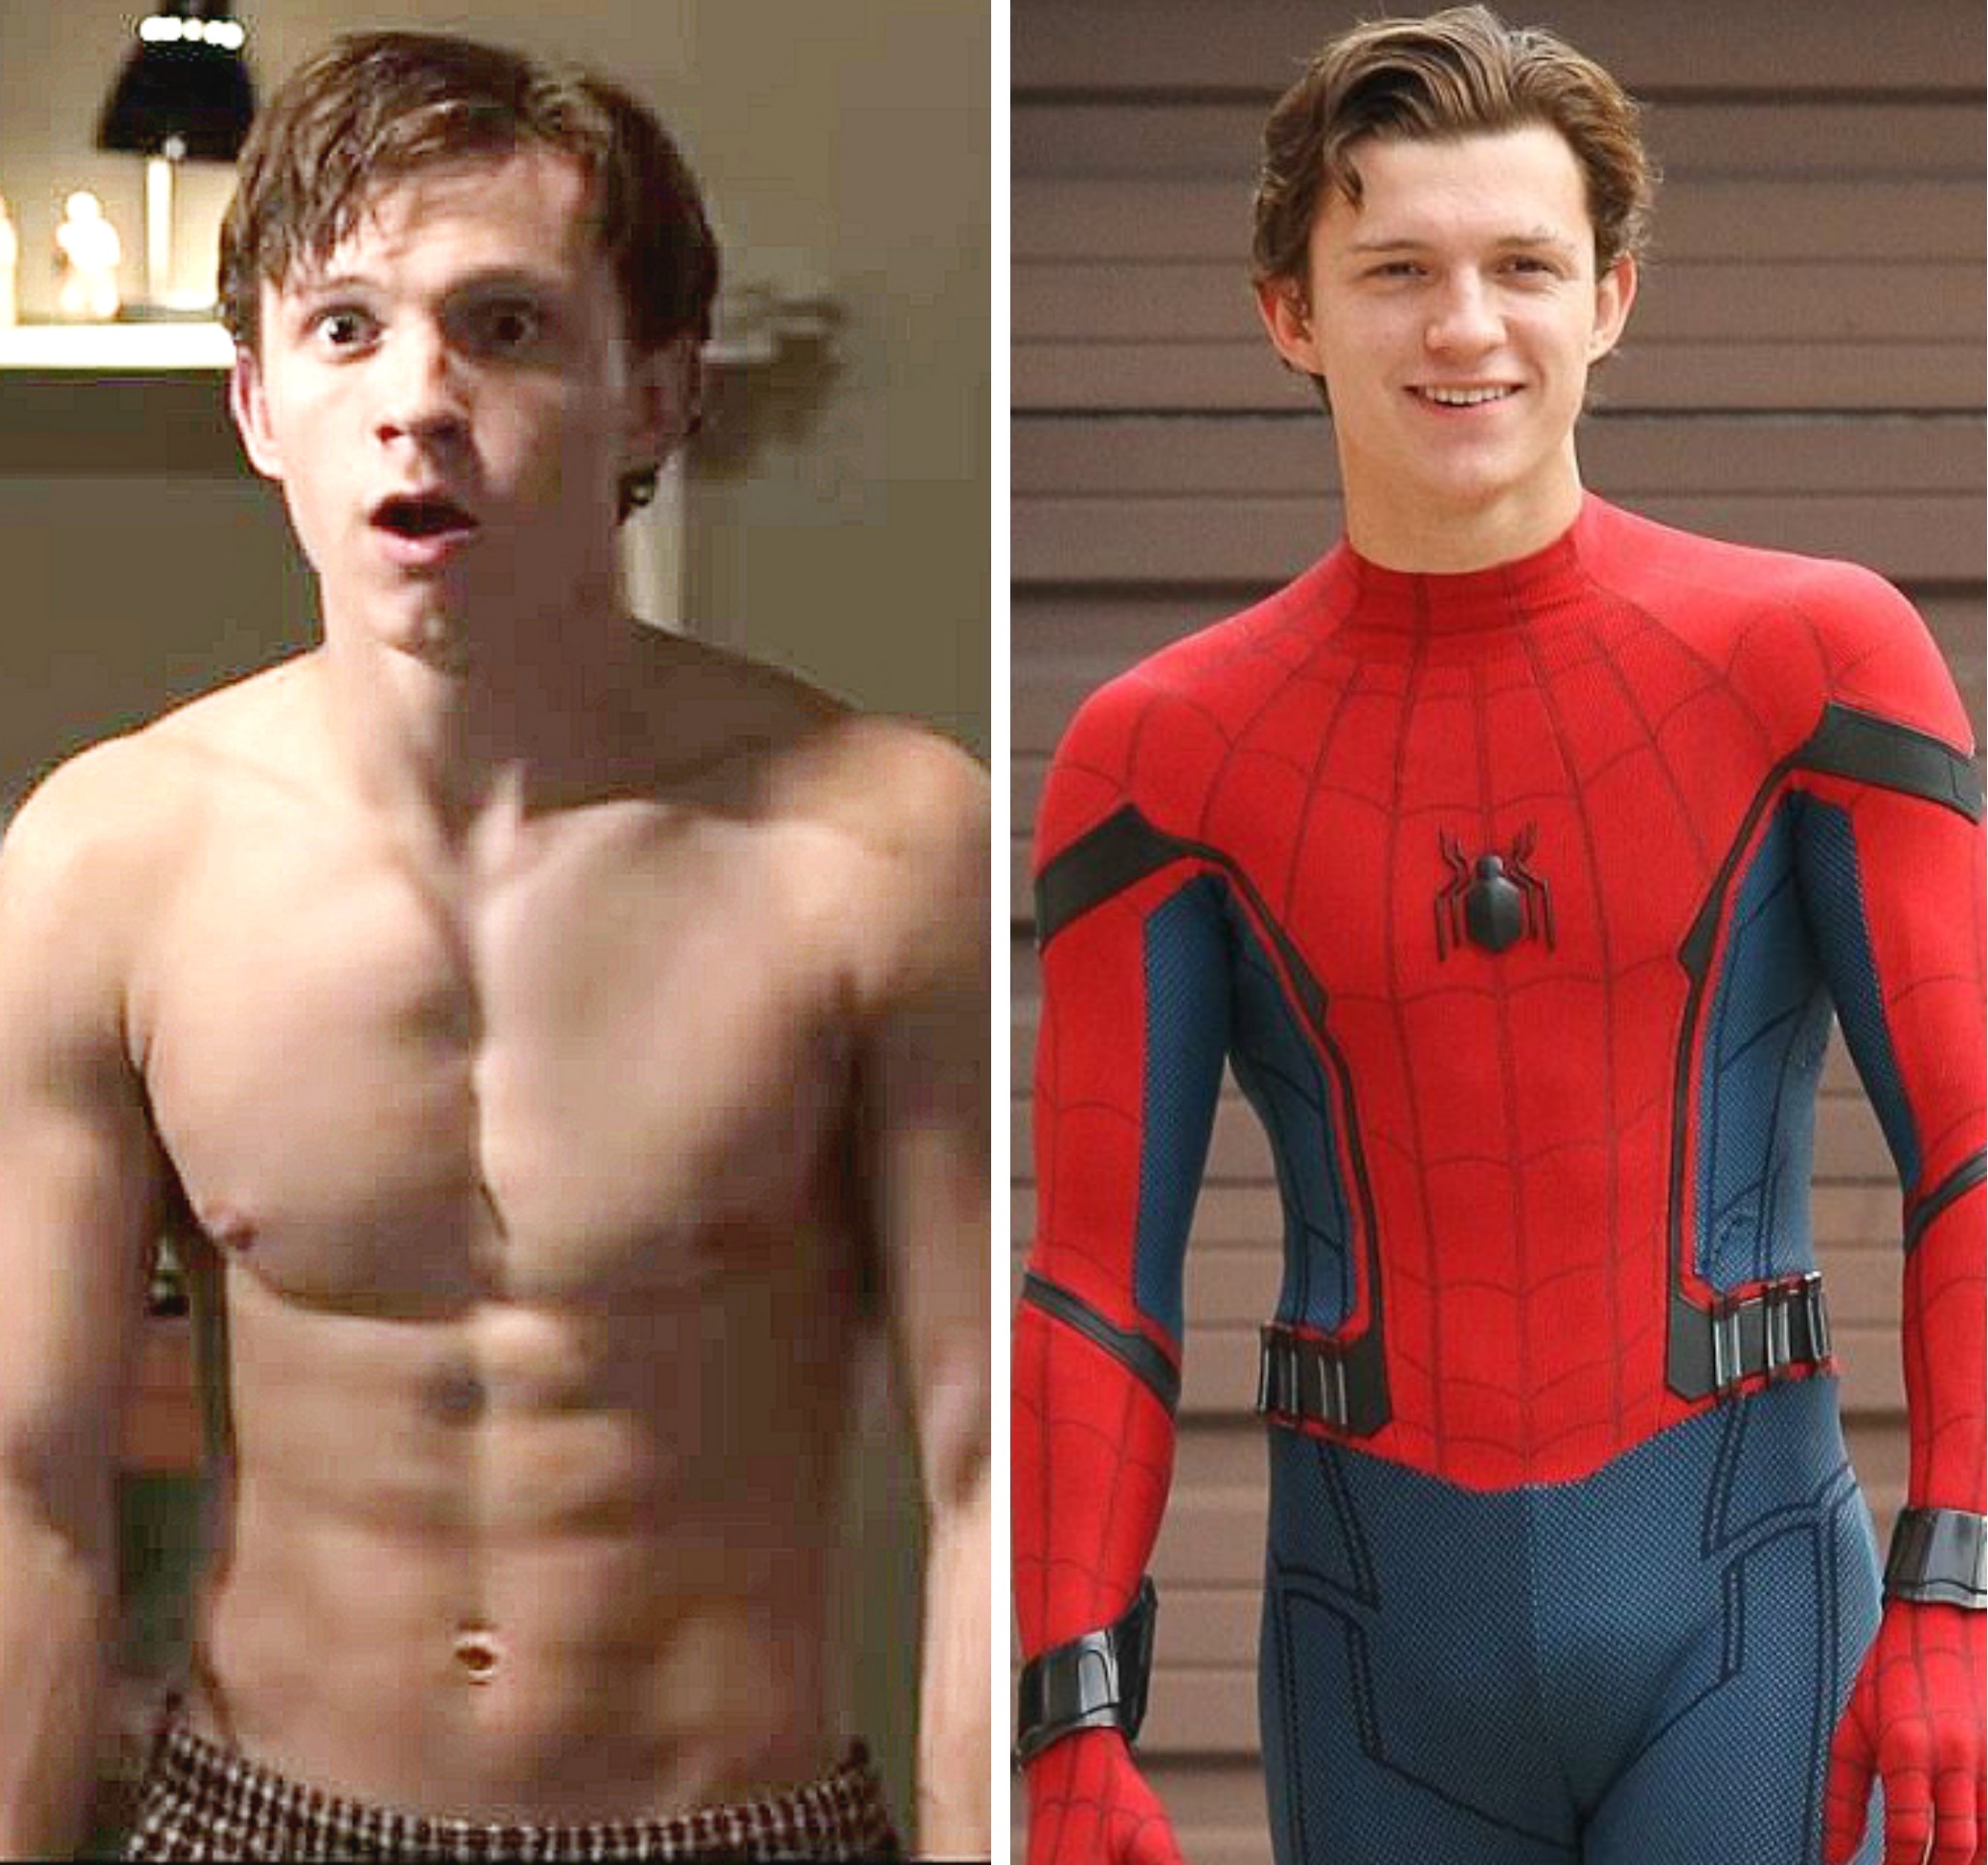 Here’s 75+ photos of Tom Holland shirtless and in his Spider Man costume